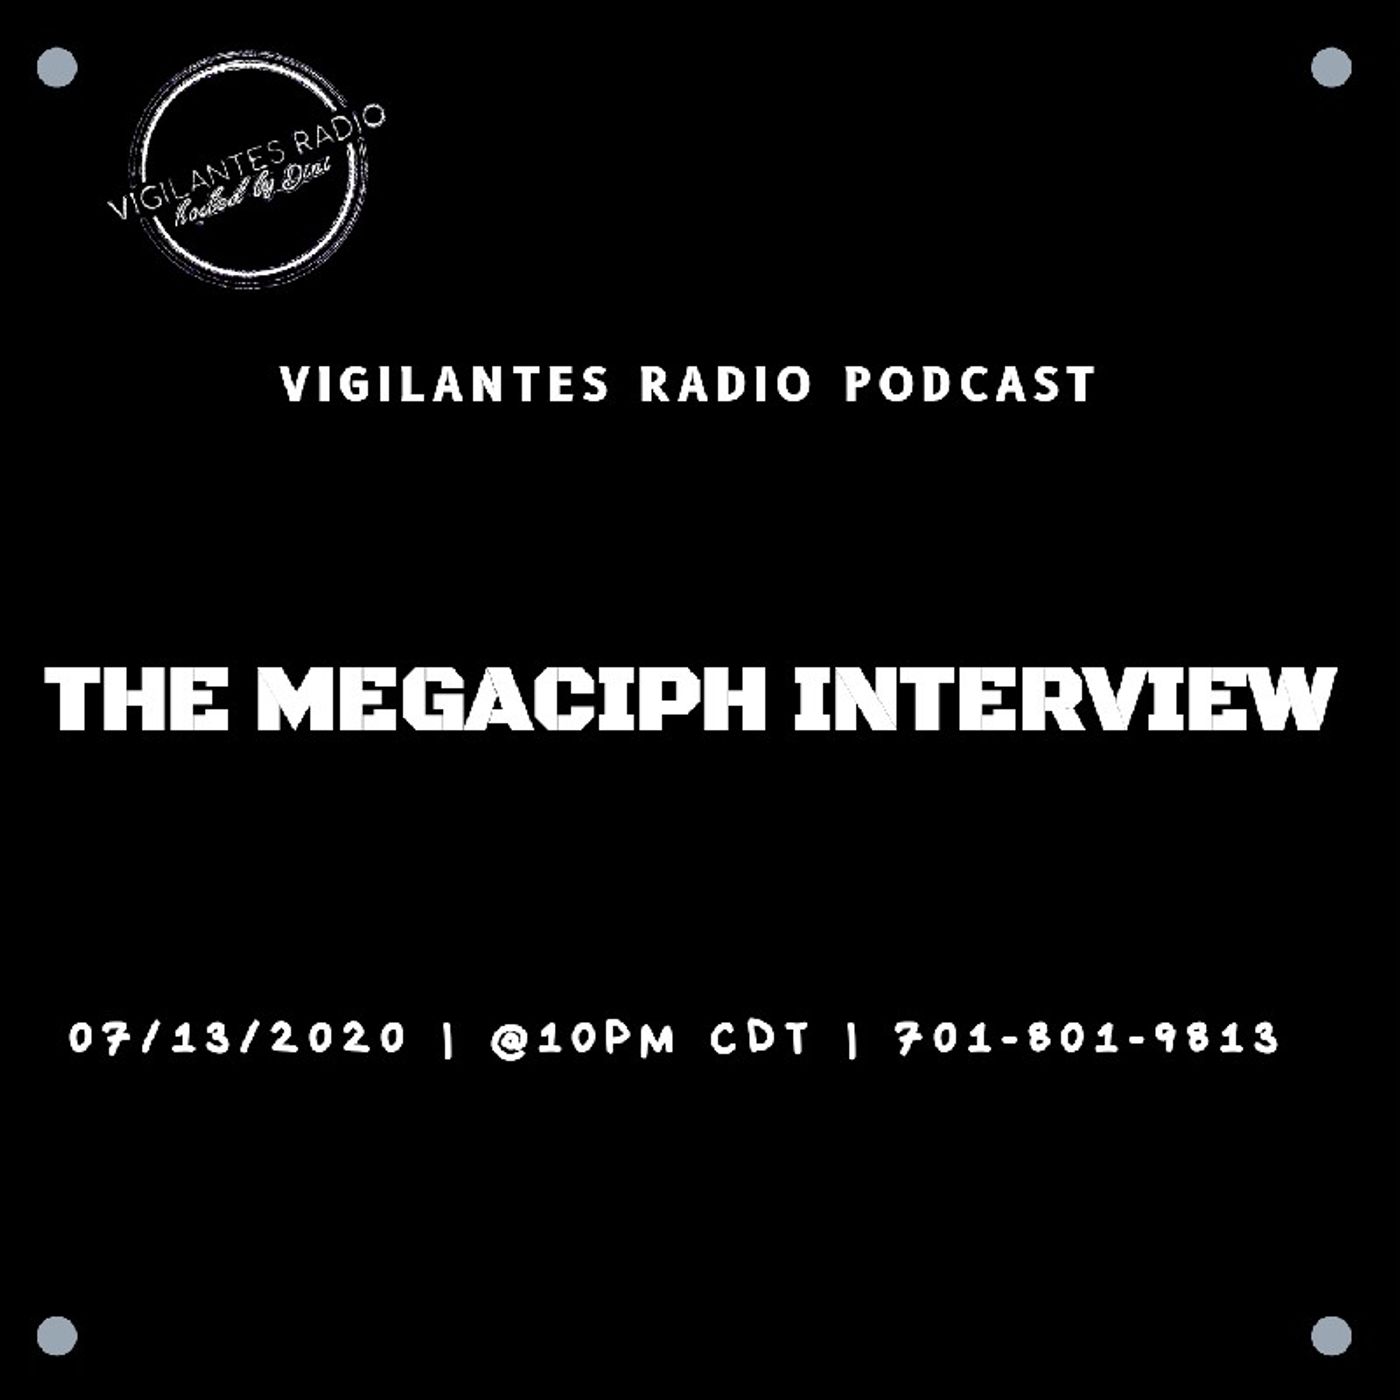 The Megaciph Interview. Image